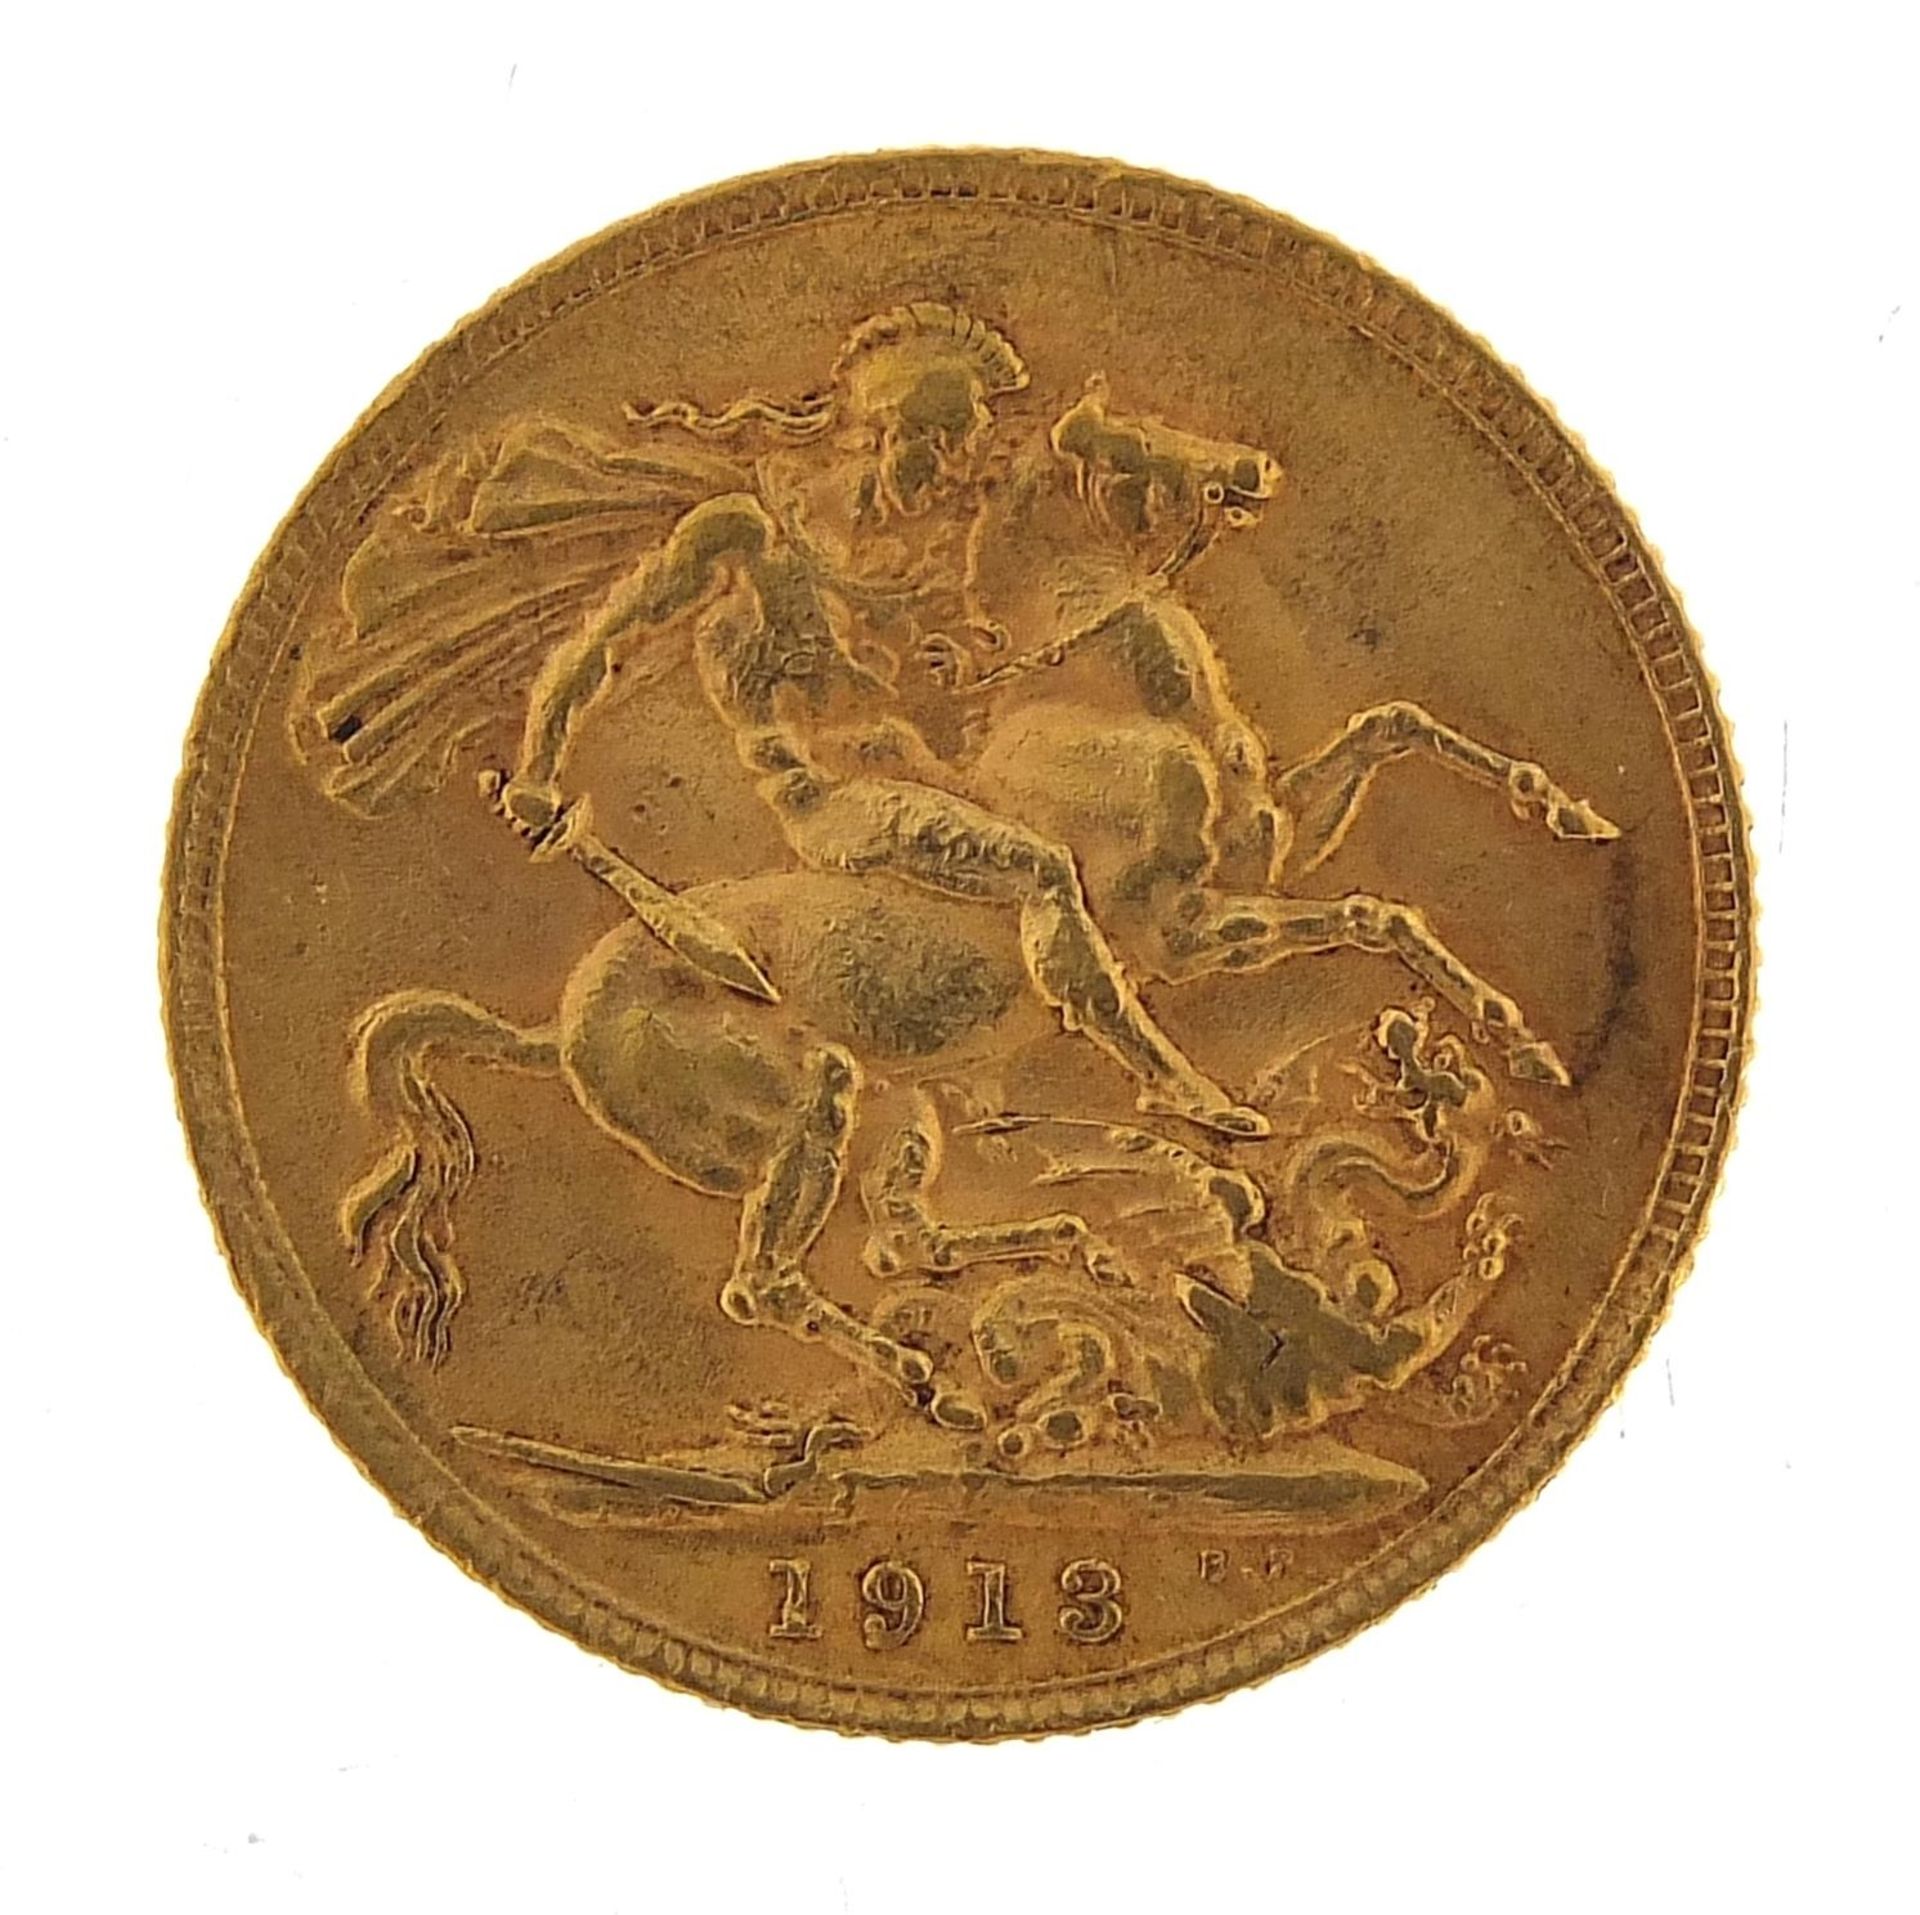 George V 1913 gold sovereign - this lot is sold without buyer?s premium, the hammer price is the